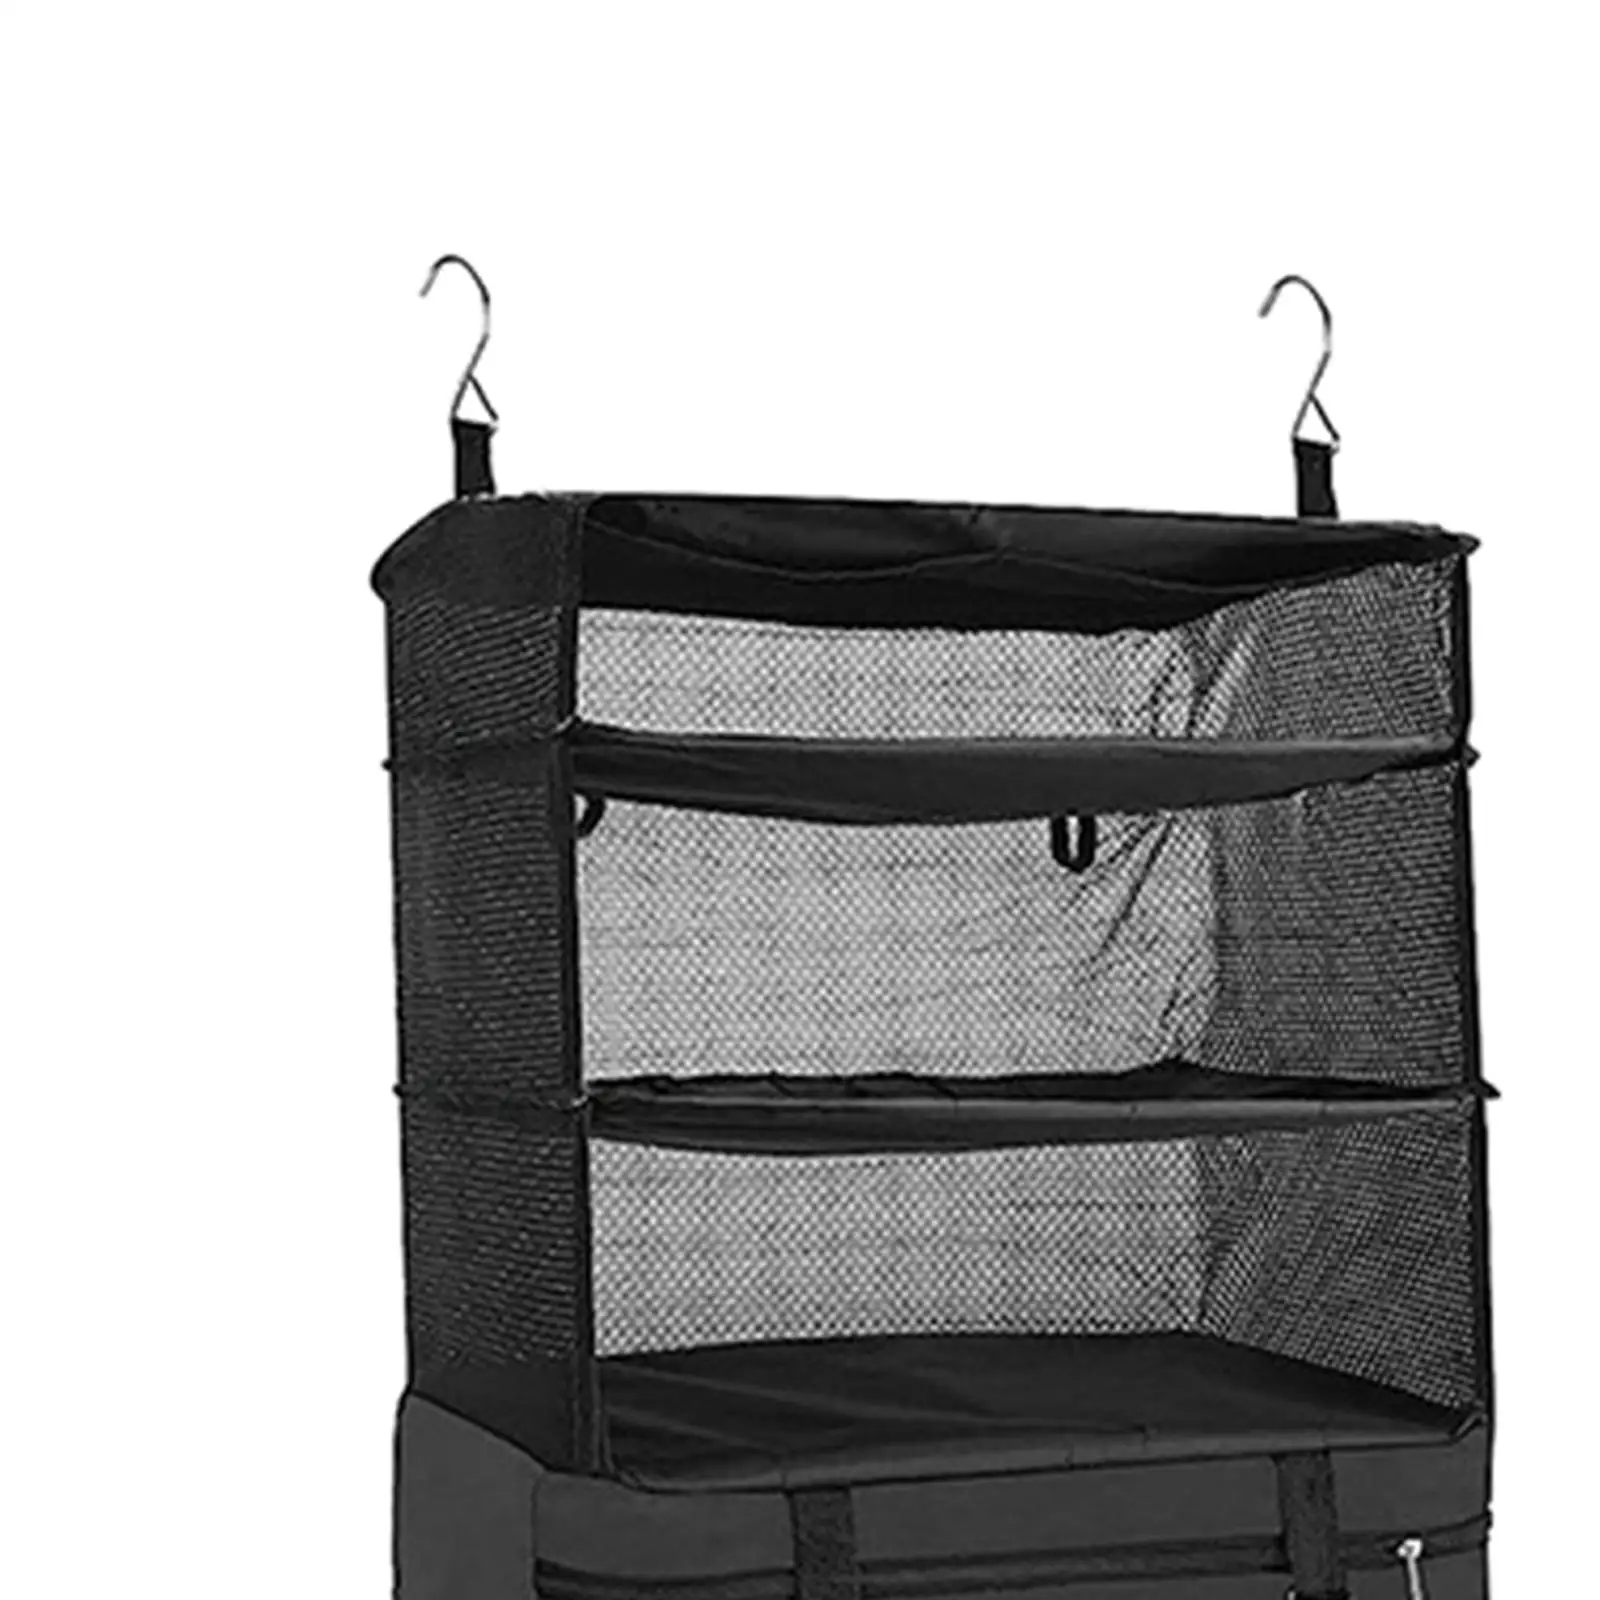 Hanging Travel Garment Shelves Travel Bags 3 Tier Hanging Closet Carry on Suitcase Packing Cubes for Travel Essentials